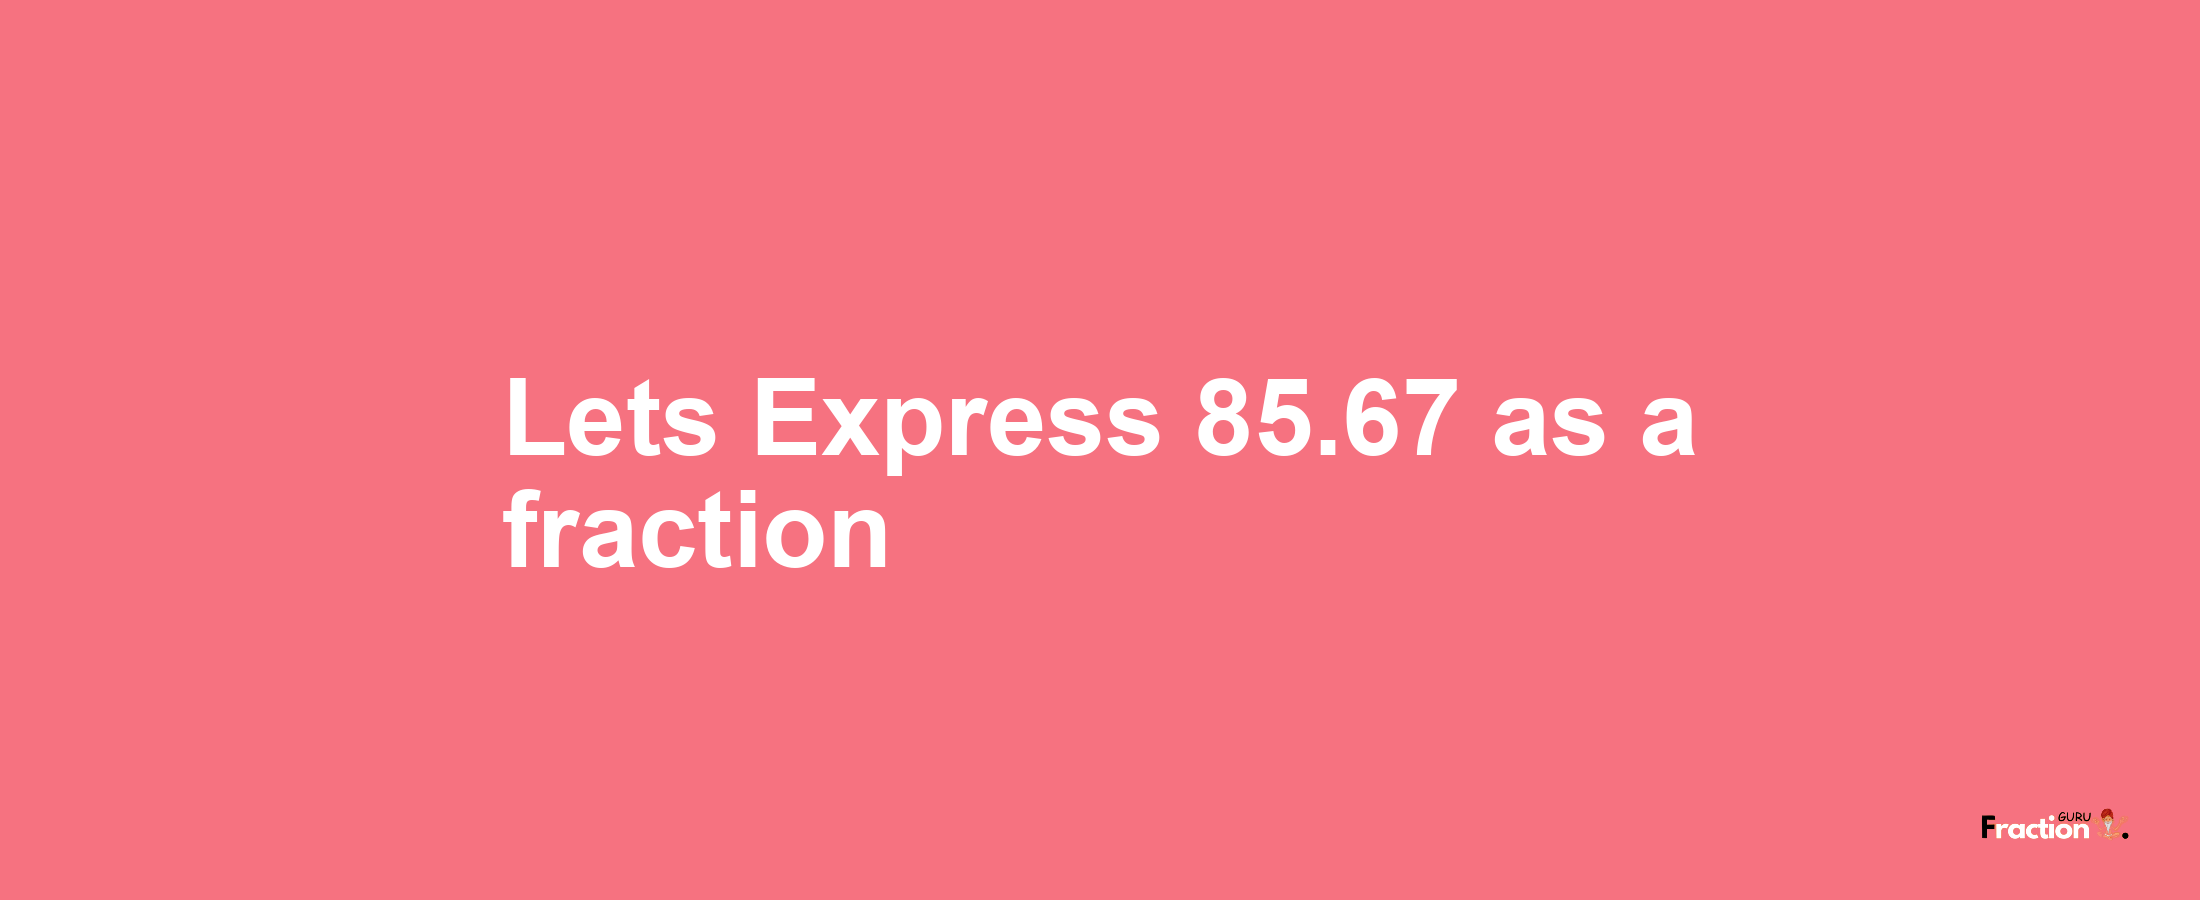 Lets Express 85.67 as afraction